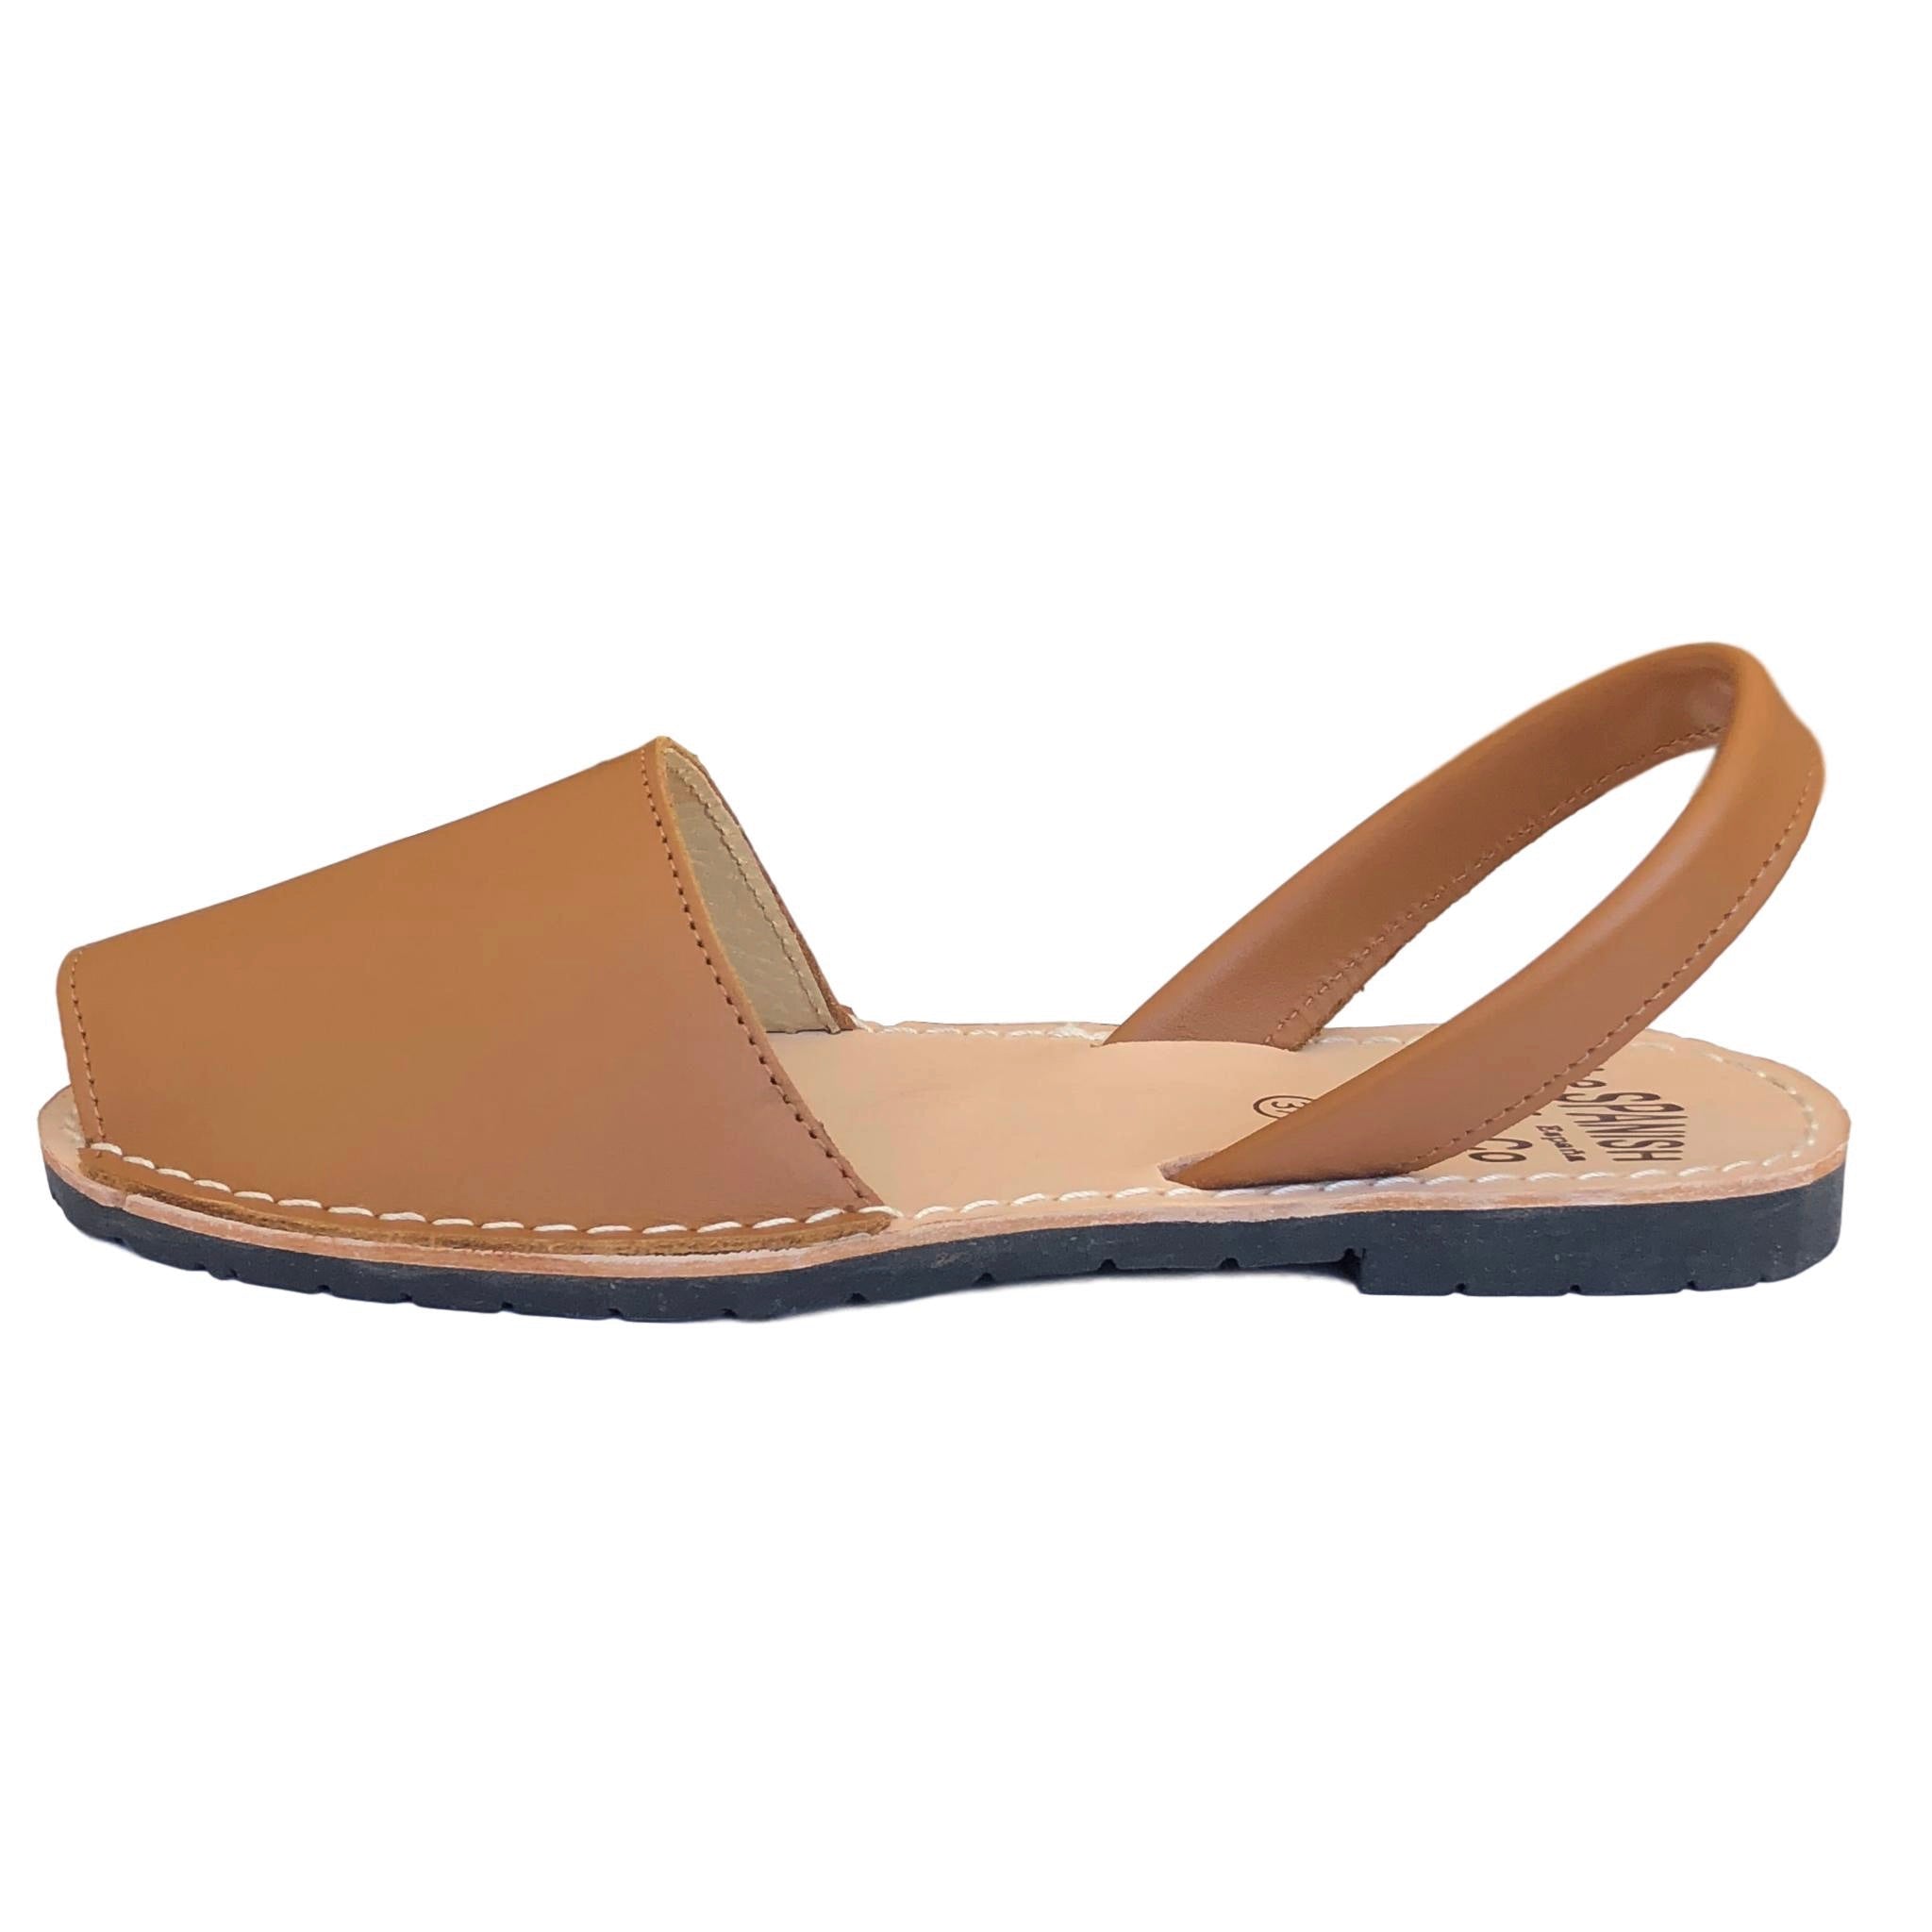 Camel classic Spanish sandals - side view